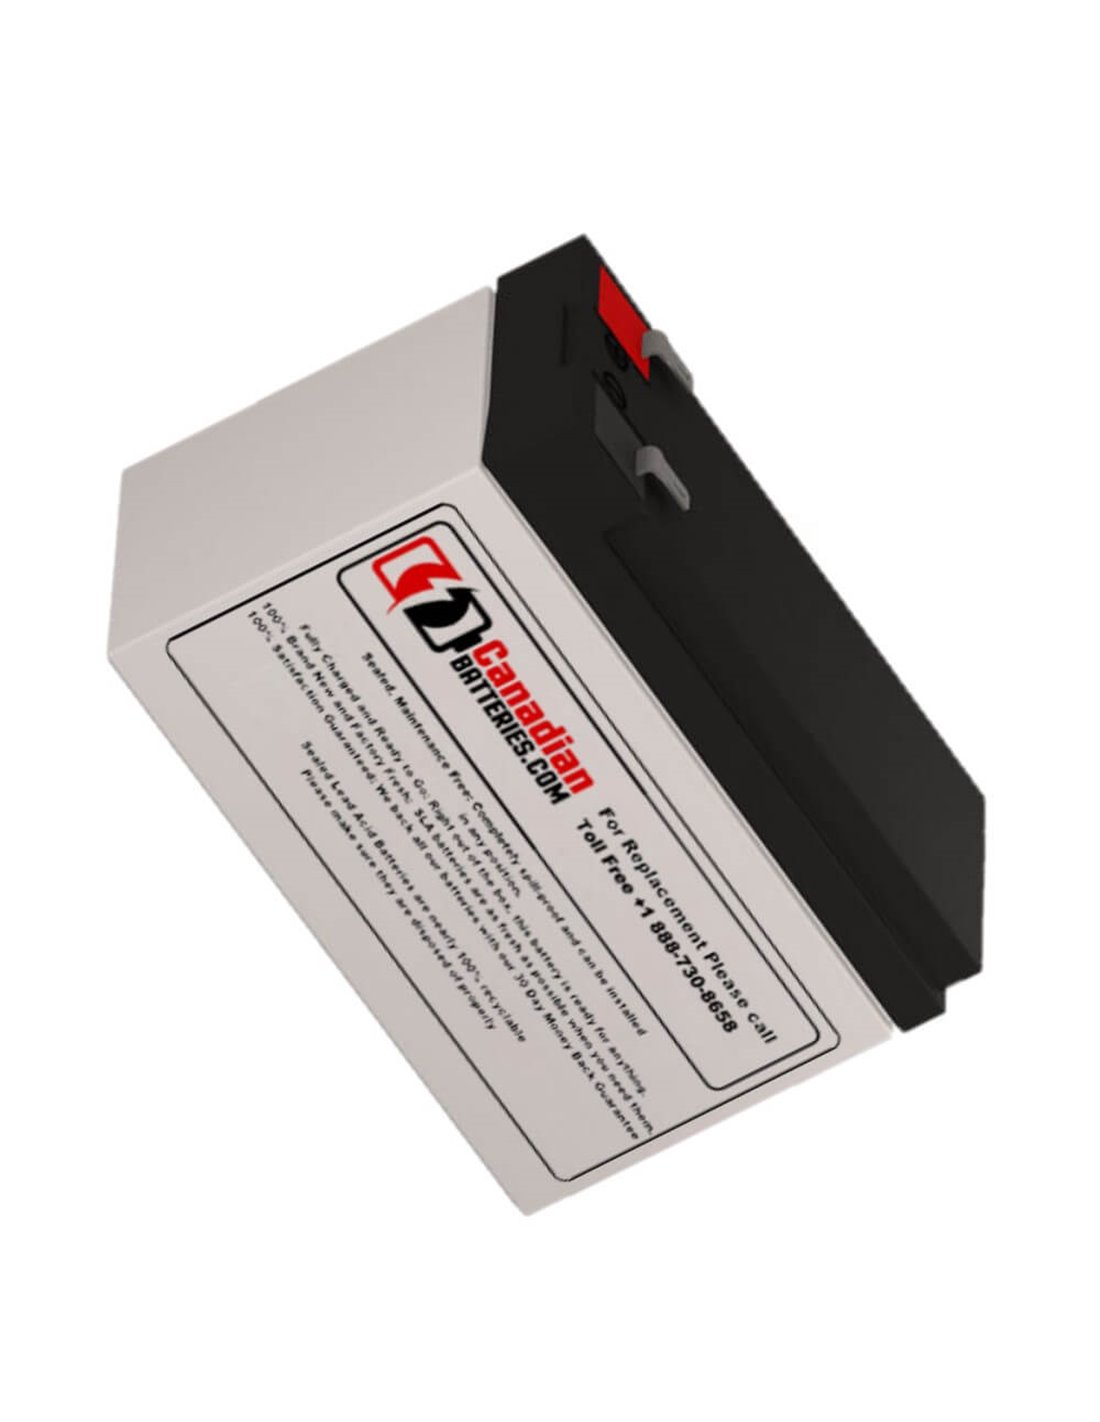 Battery for Oneac One404ag-se UPS, 1 x 12V, 9Ah - 108Wh